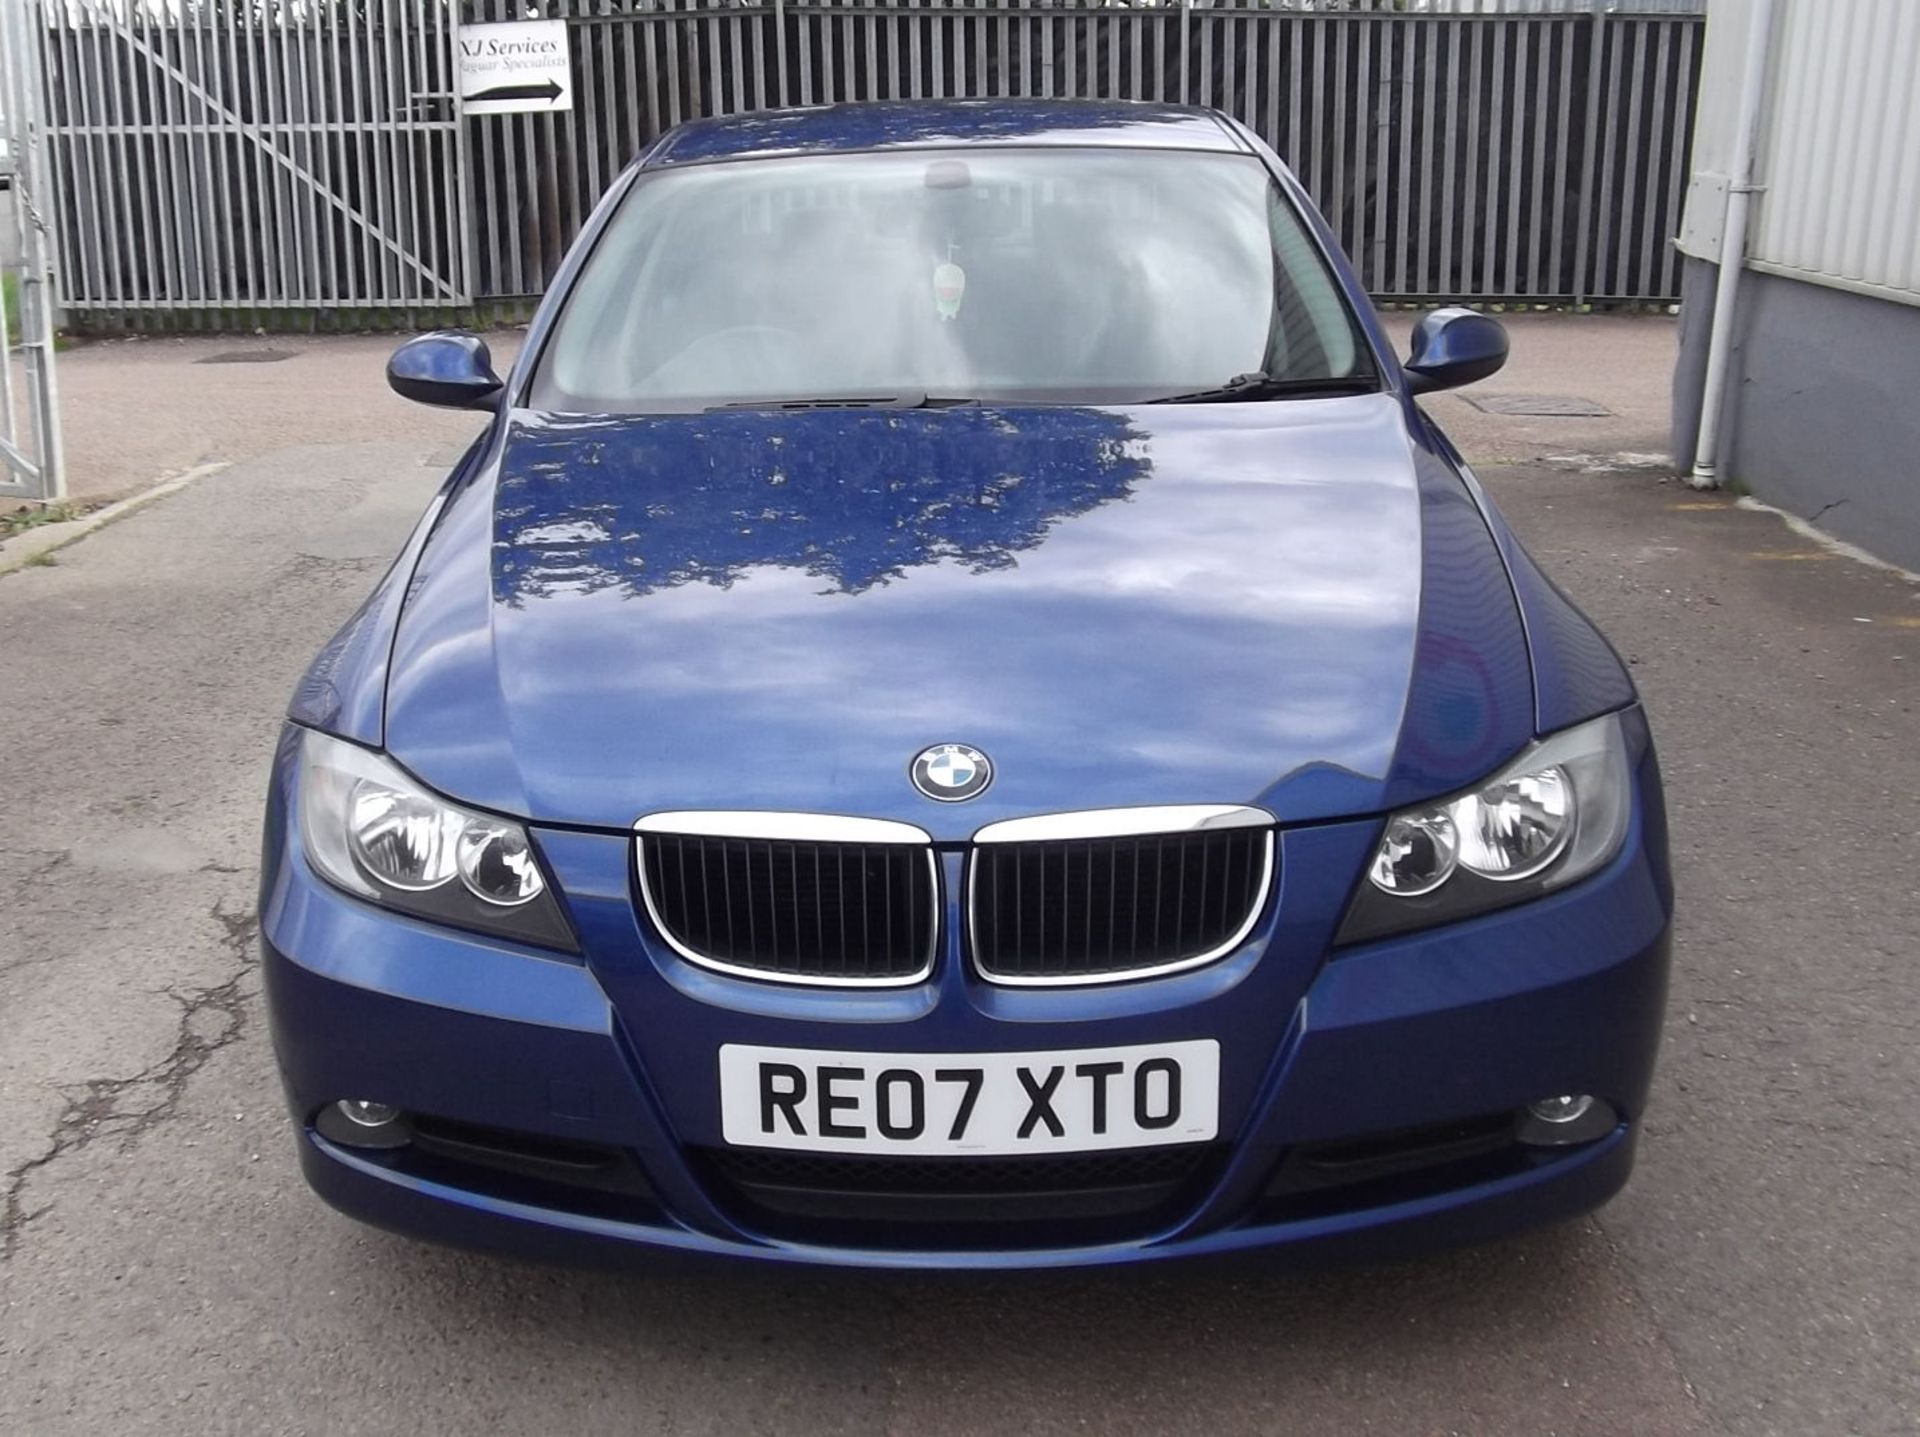 2007 BMW 318i SE 4 Door Saloon - CL505 - NO VAT ON THE HAMMER - Location: Corby - Image 2 of 11